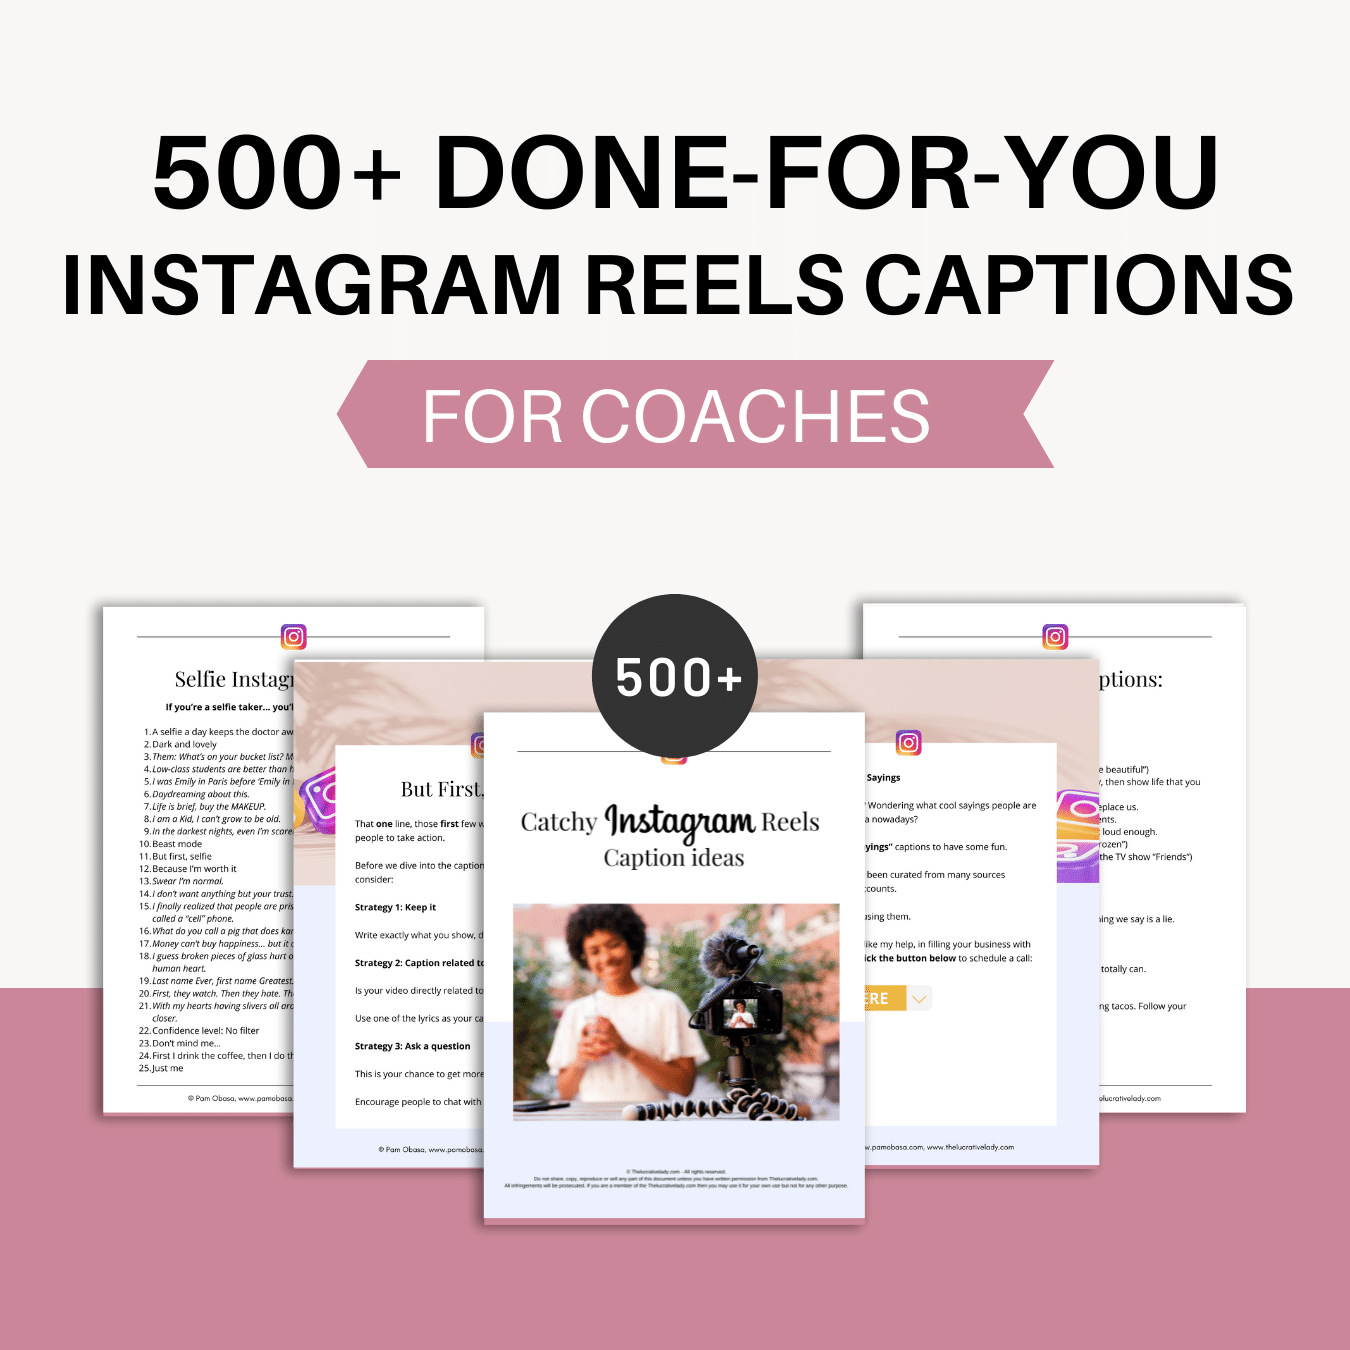 500+ Done-For-You Instagram Reels Captions for Coaches